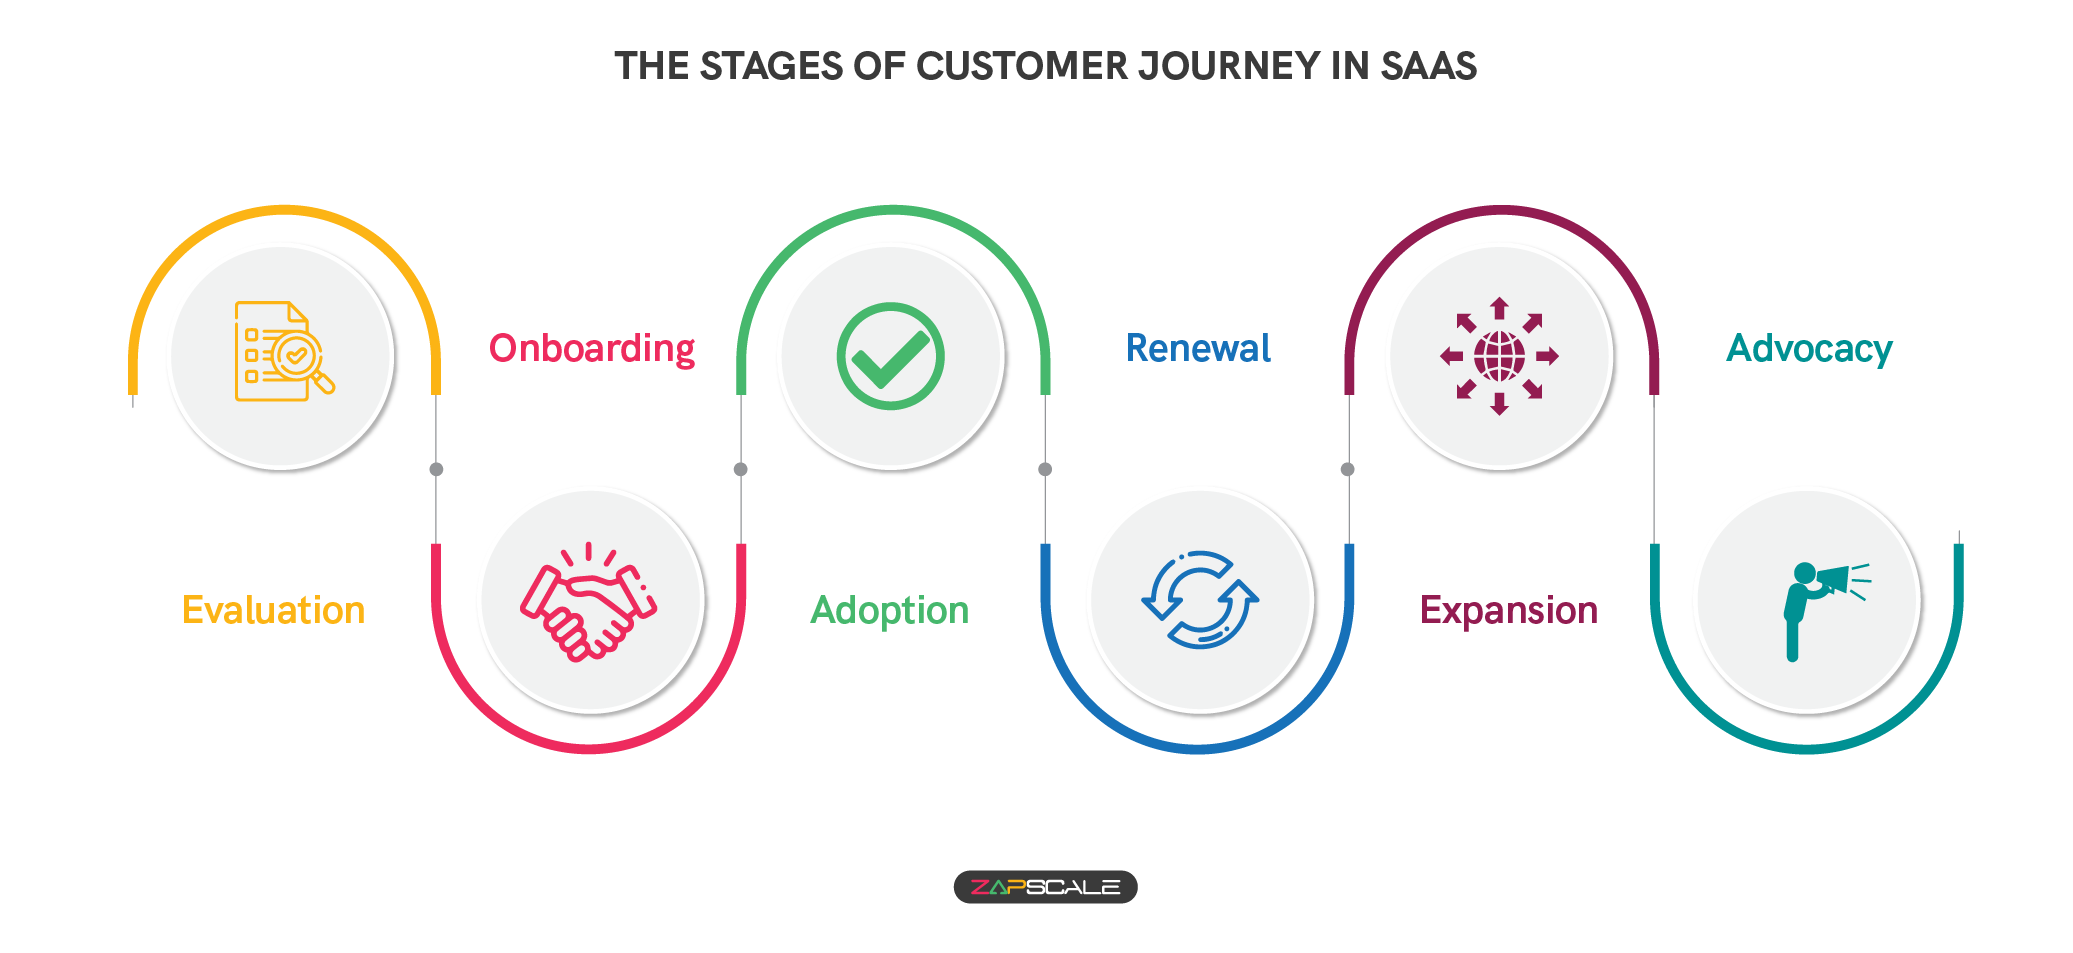 The stages of customer journey in SaaS